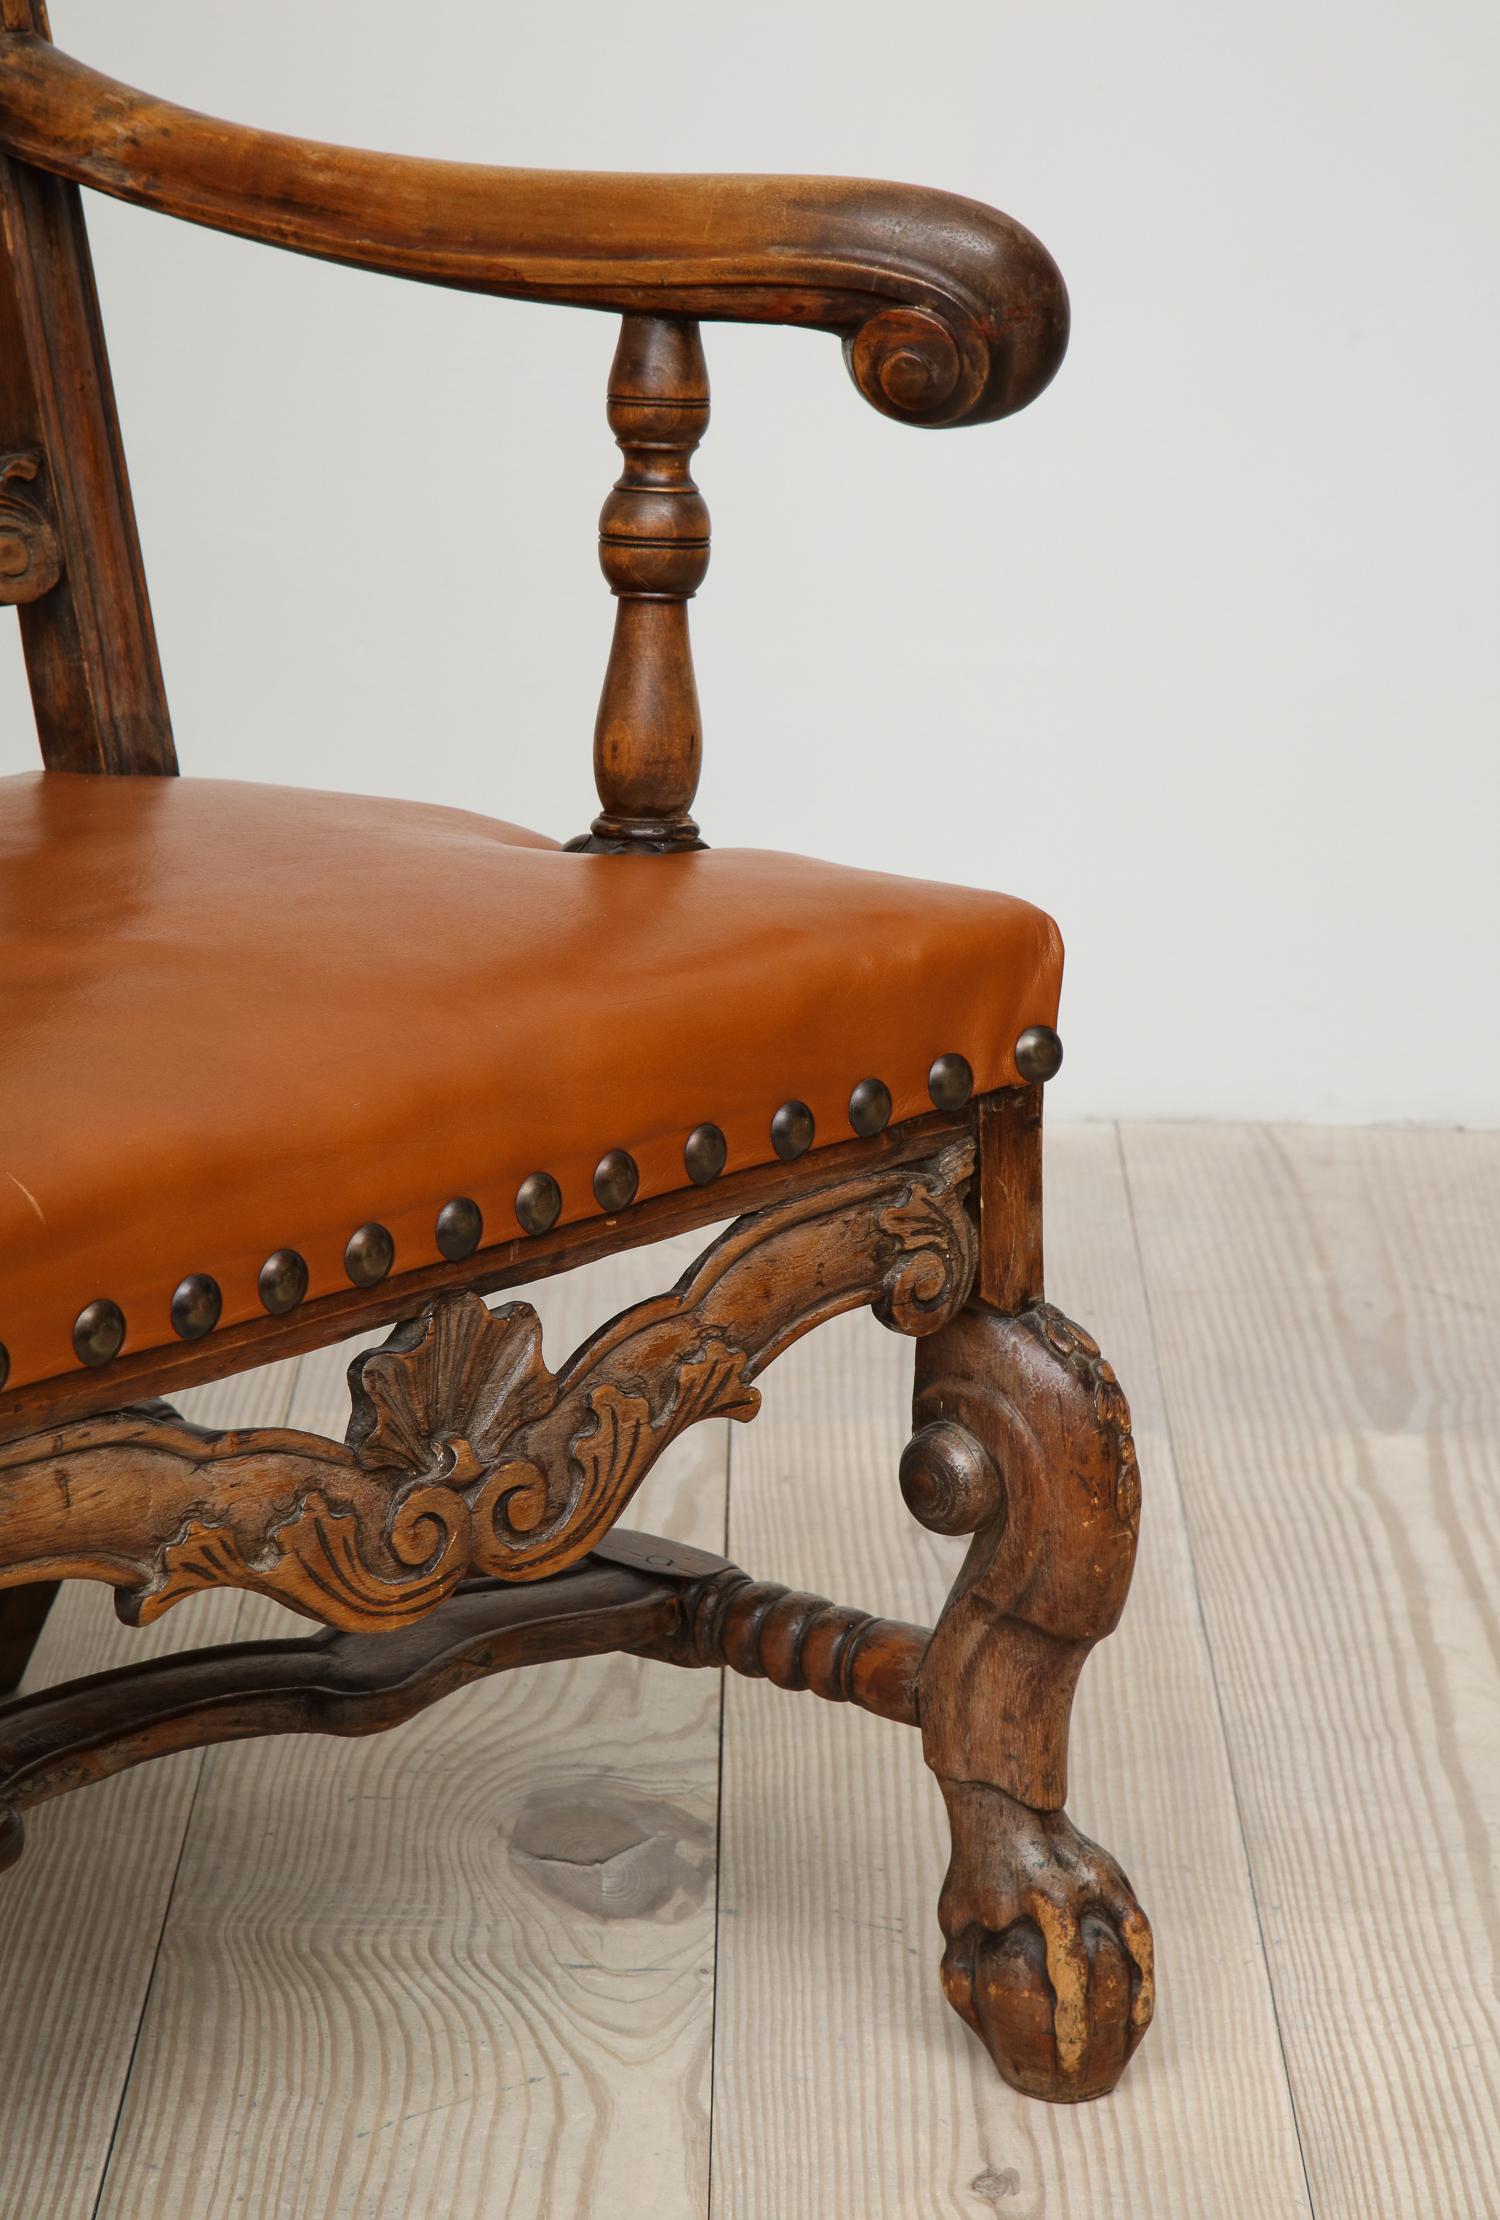 Exceptional Swedish Baroque 18th century armchair, circa 1740, origin: Sweden, with beautifully carved details such as shells, scrolls on ball and claw feet.  Original stamp (brass): Crown Statsverket  / no. 77 (see photograph)

Great occasional or